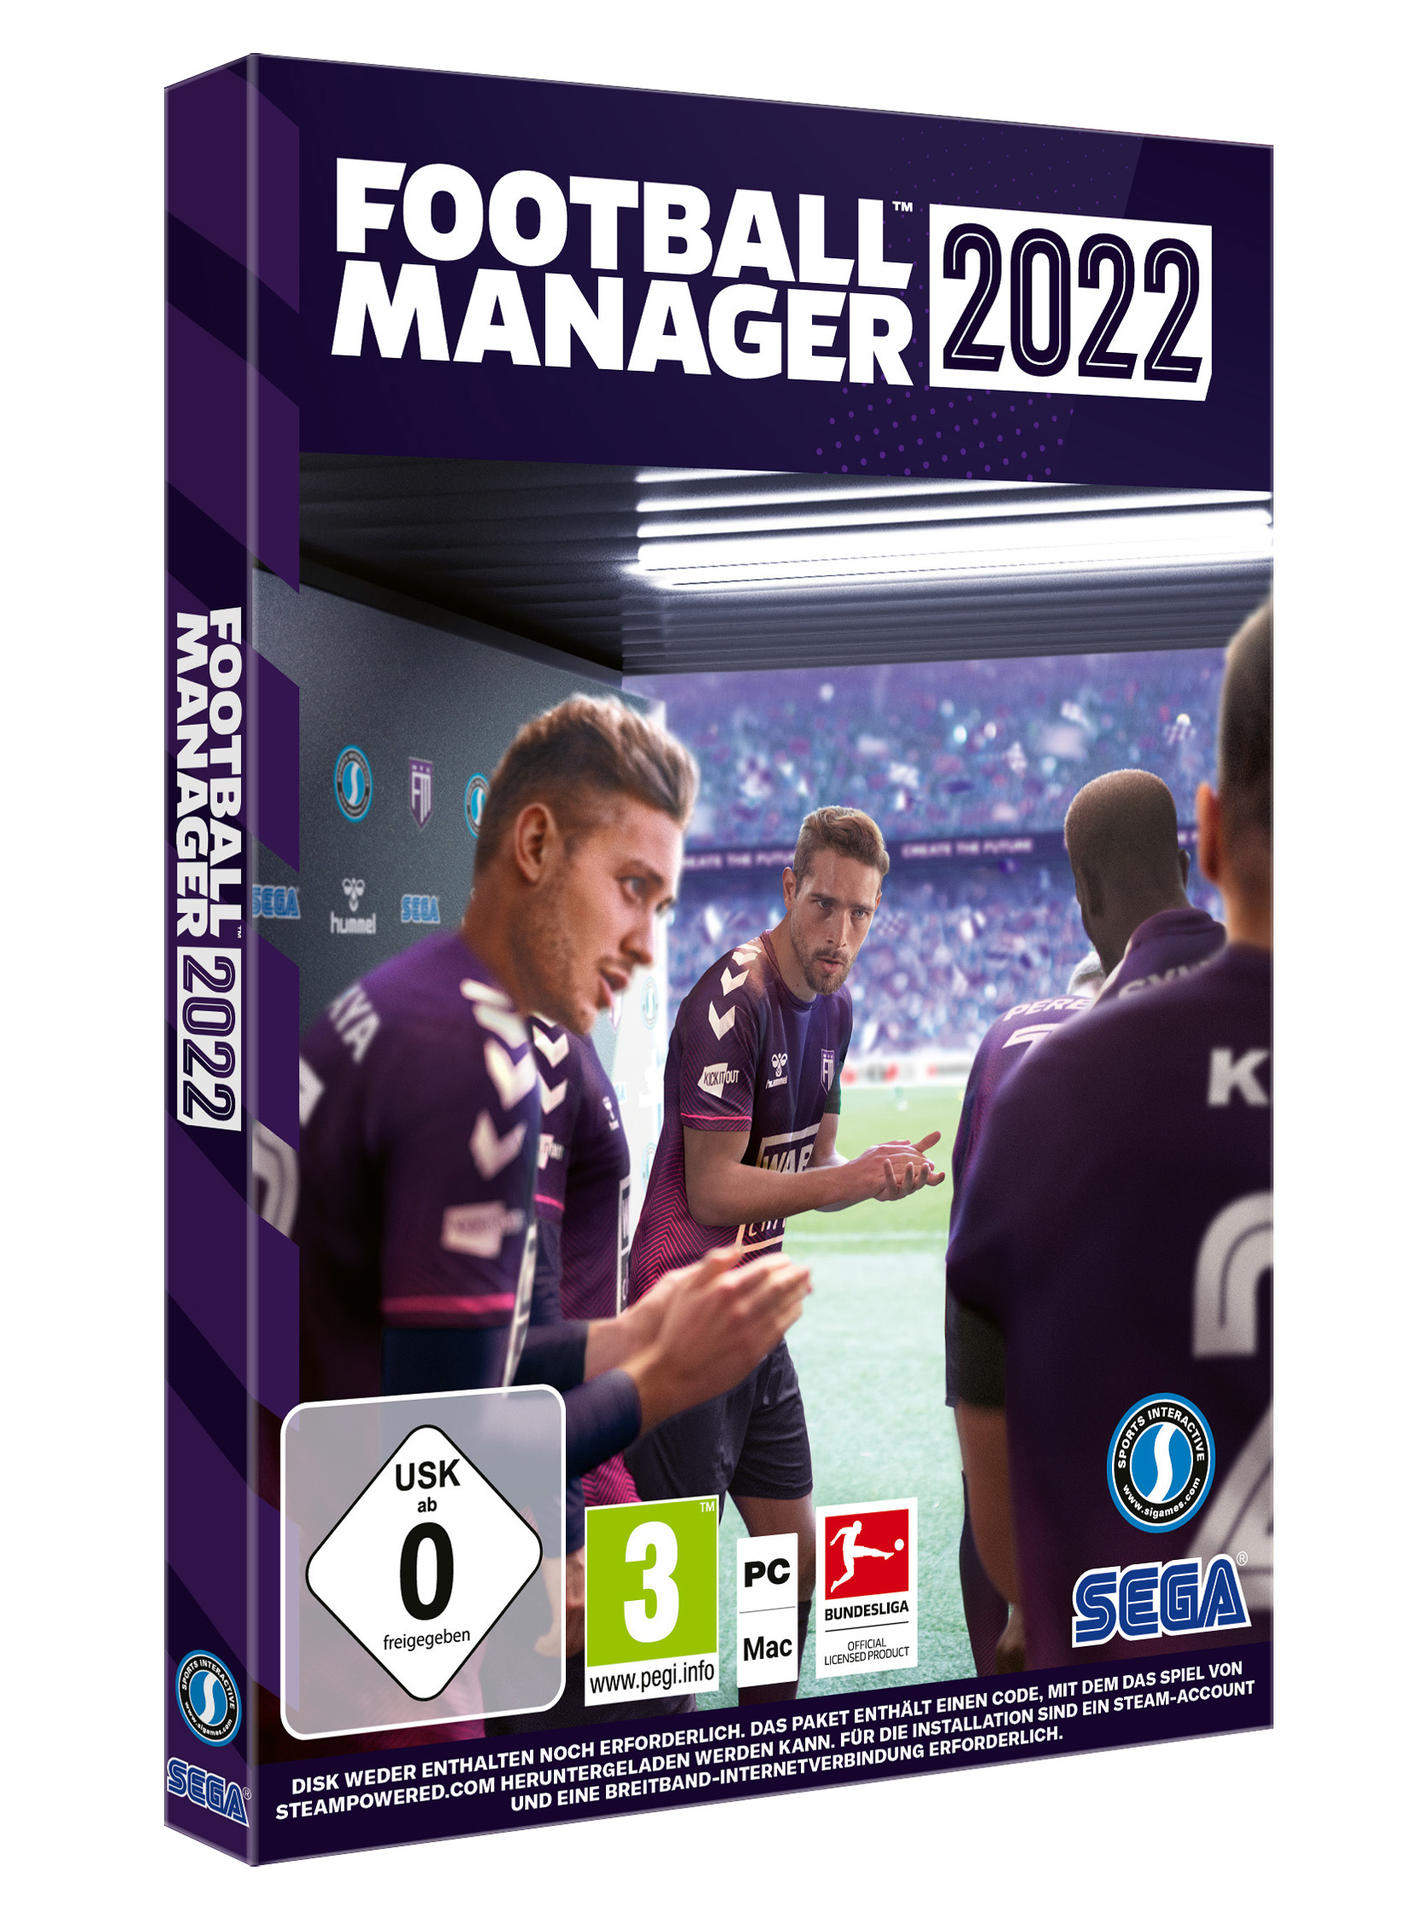 MANAGER - FOOTBALL 2022 [PC]